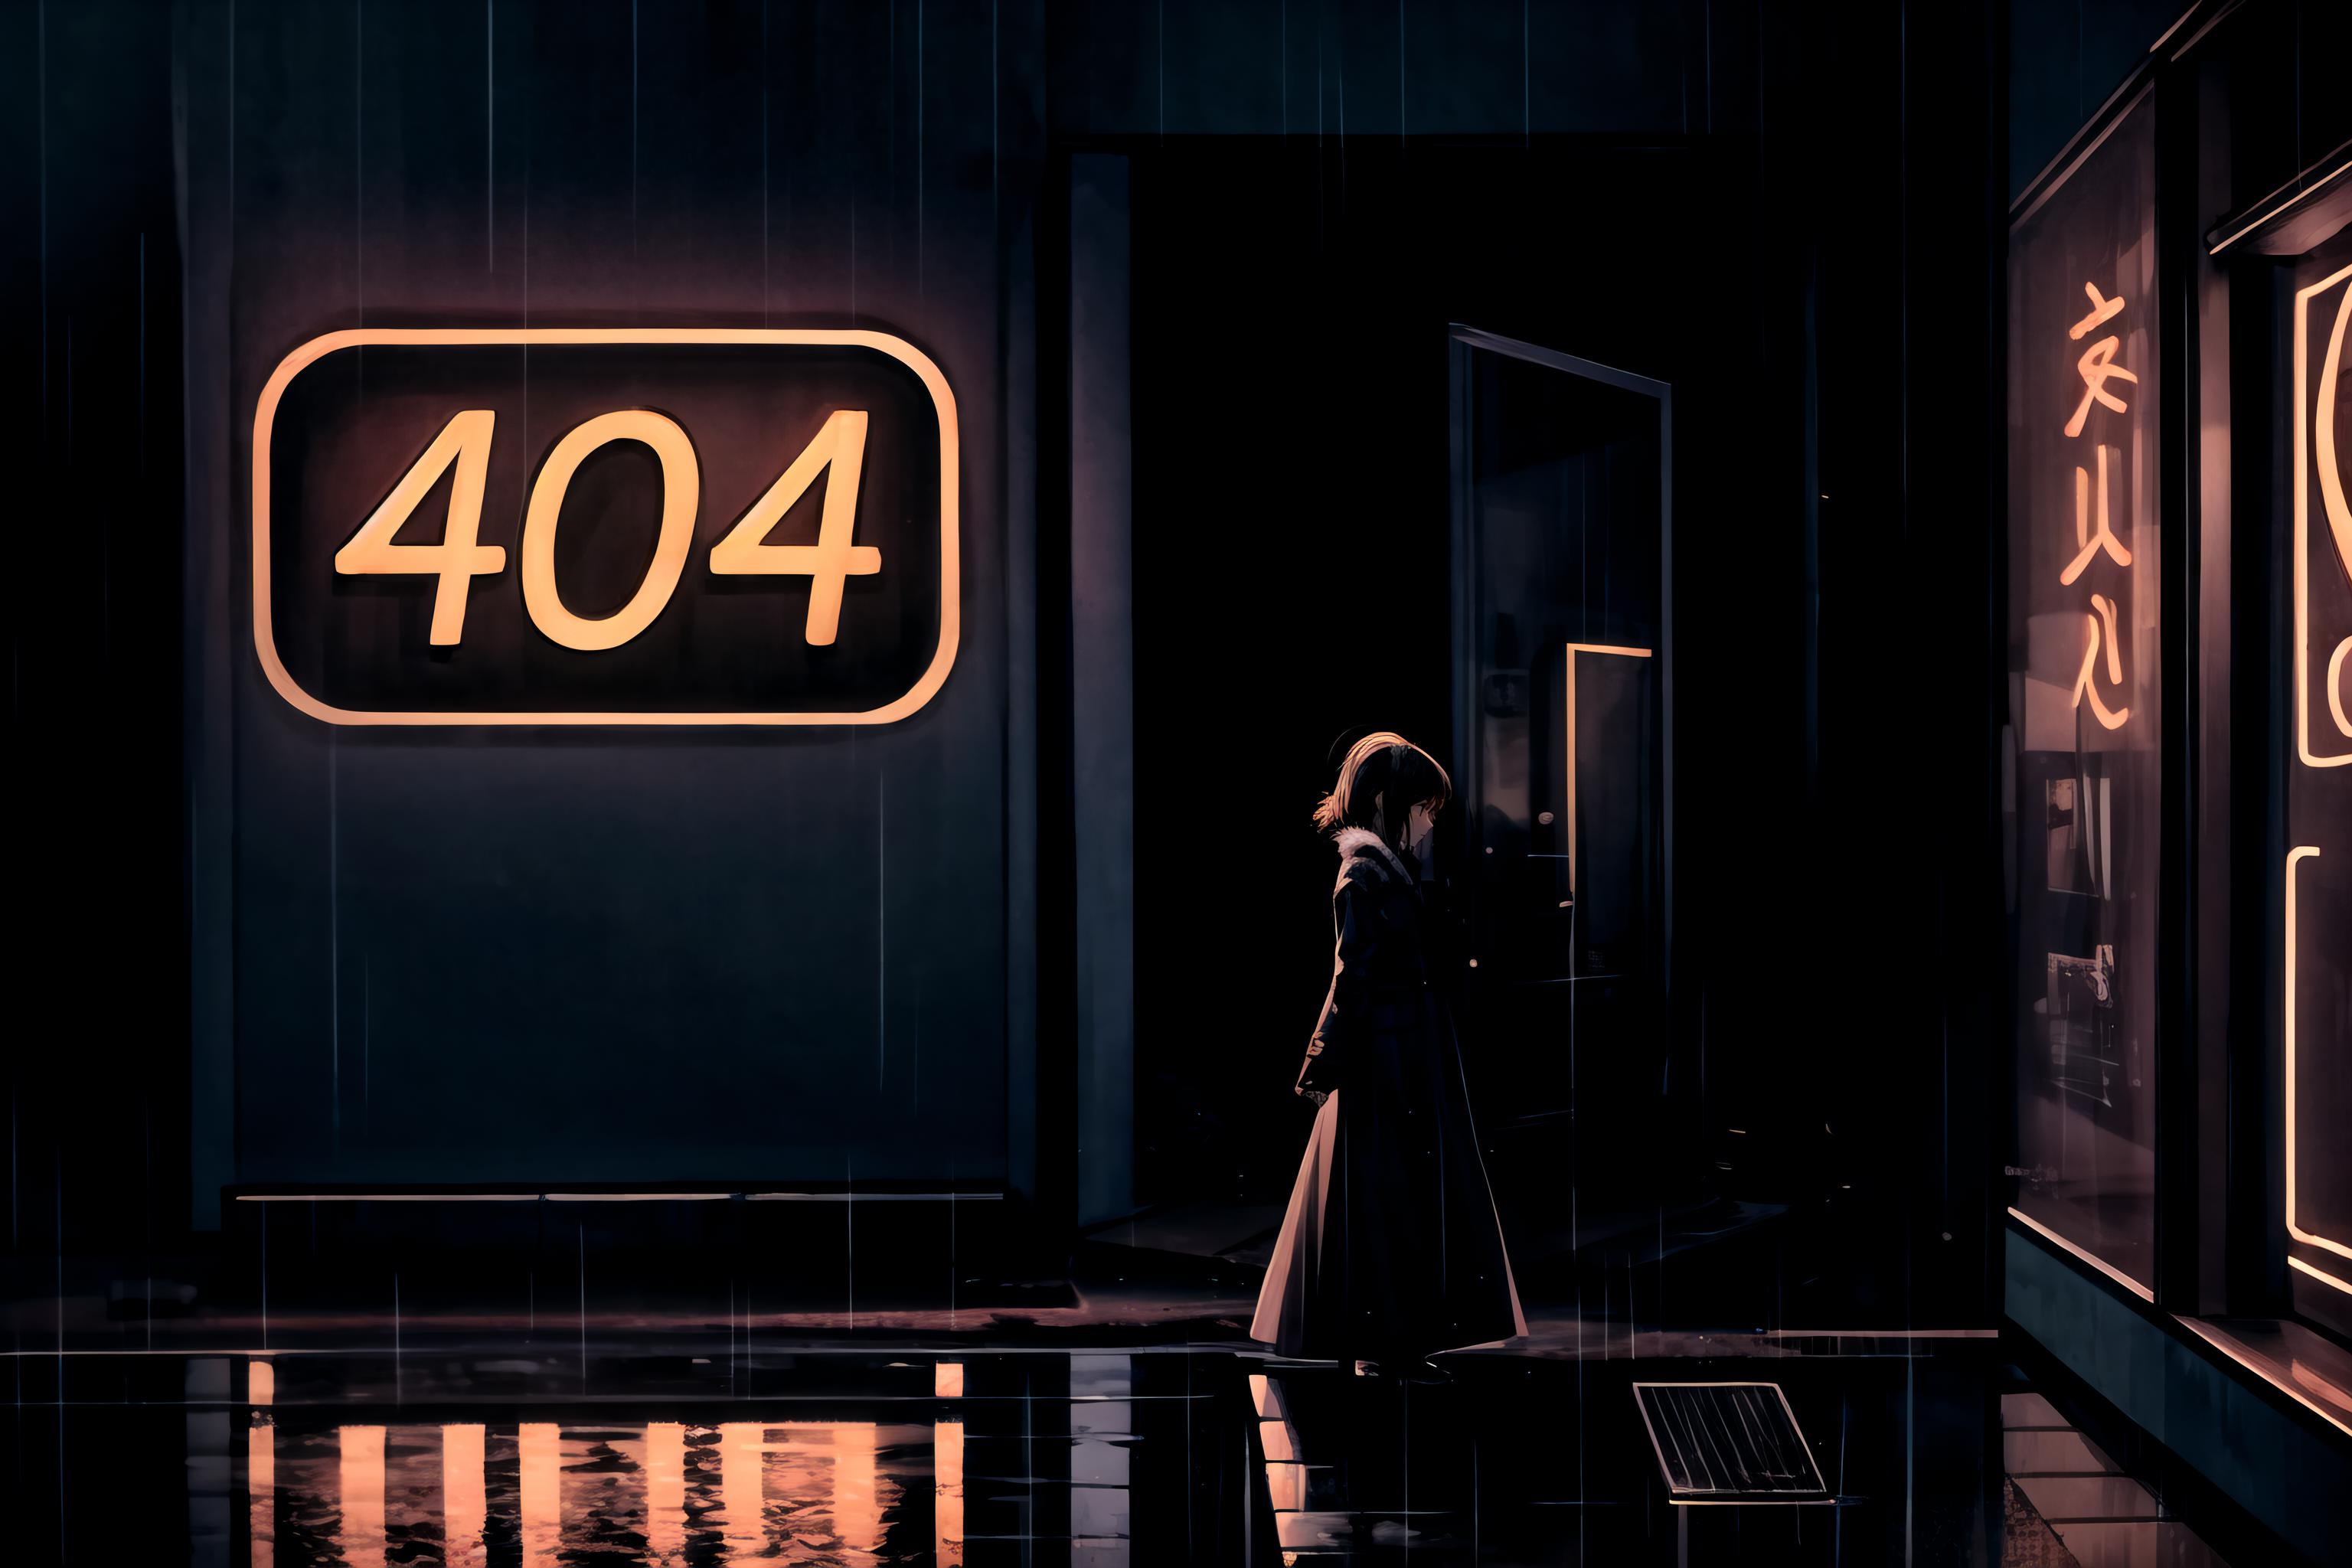 A woman walking through the rain past a building with the number 404 on it.